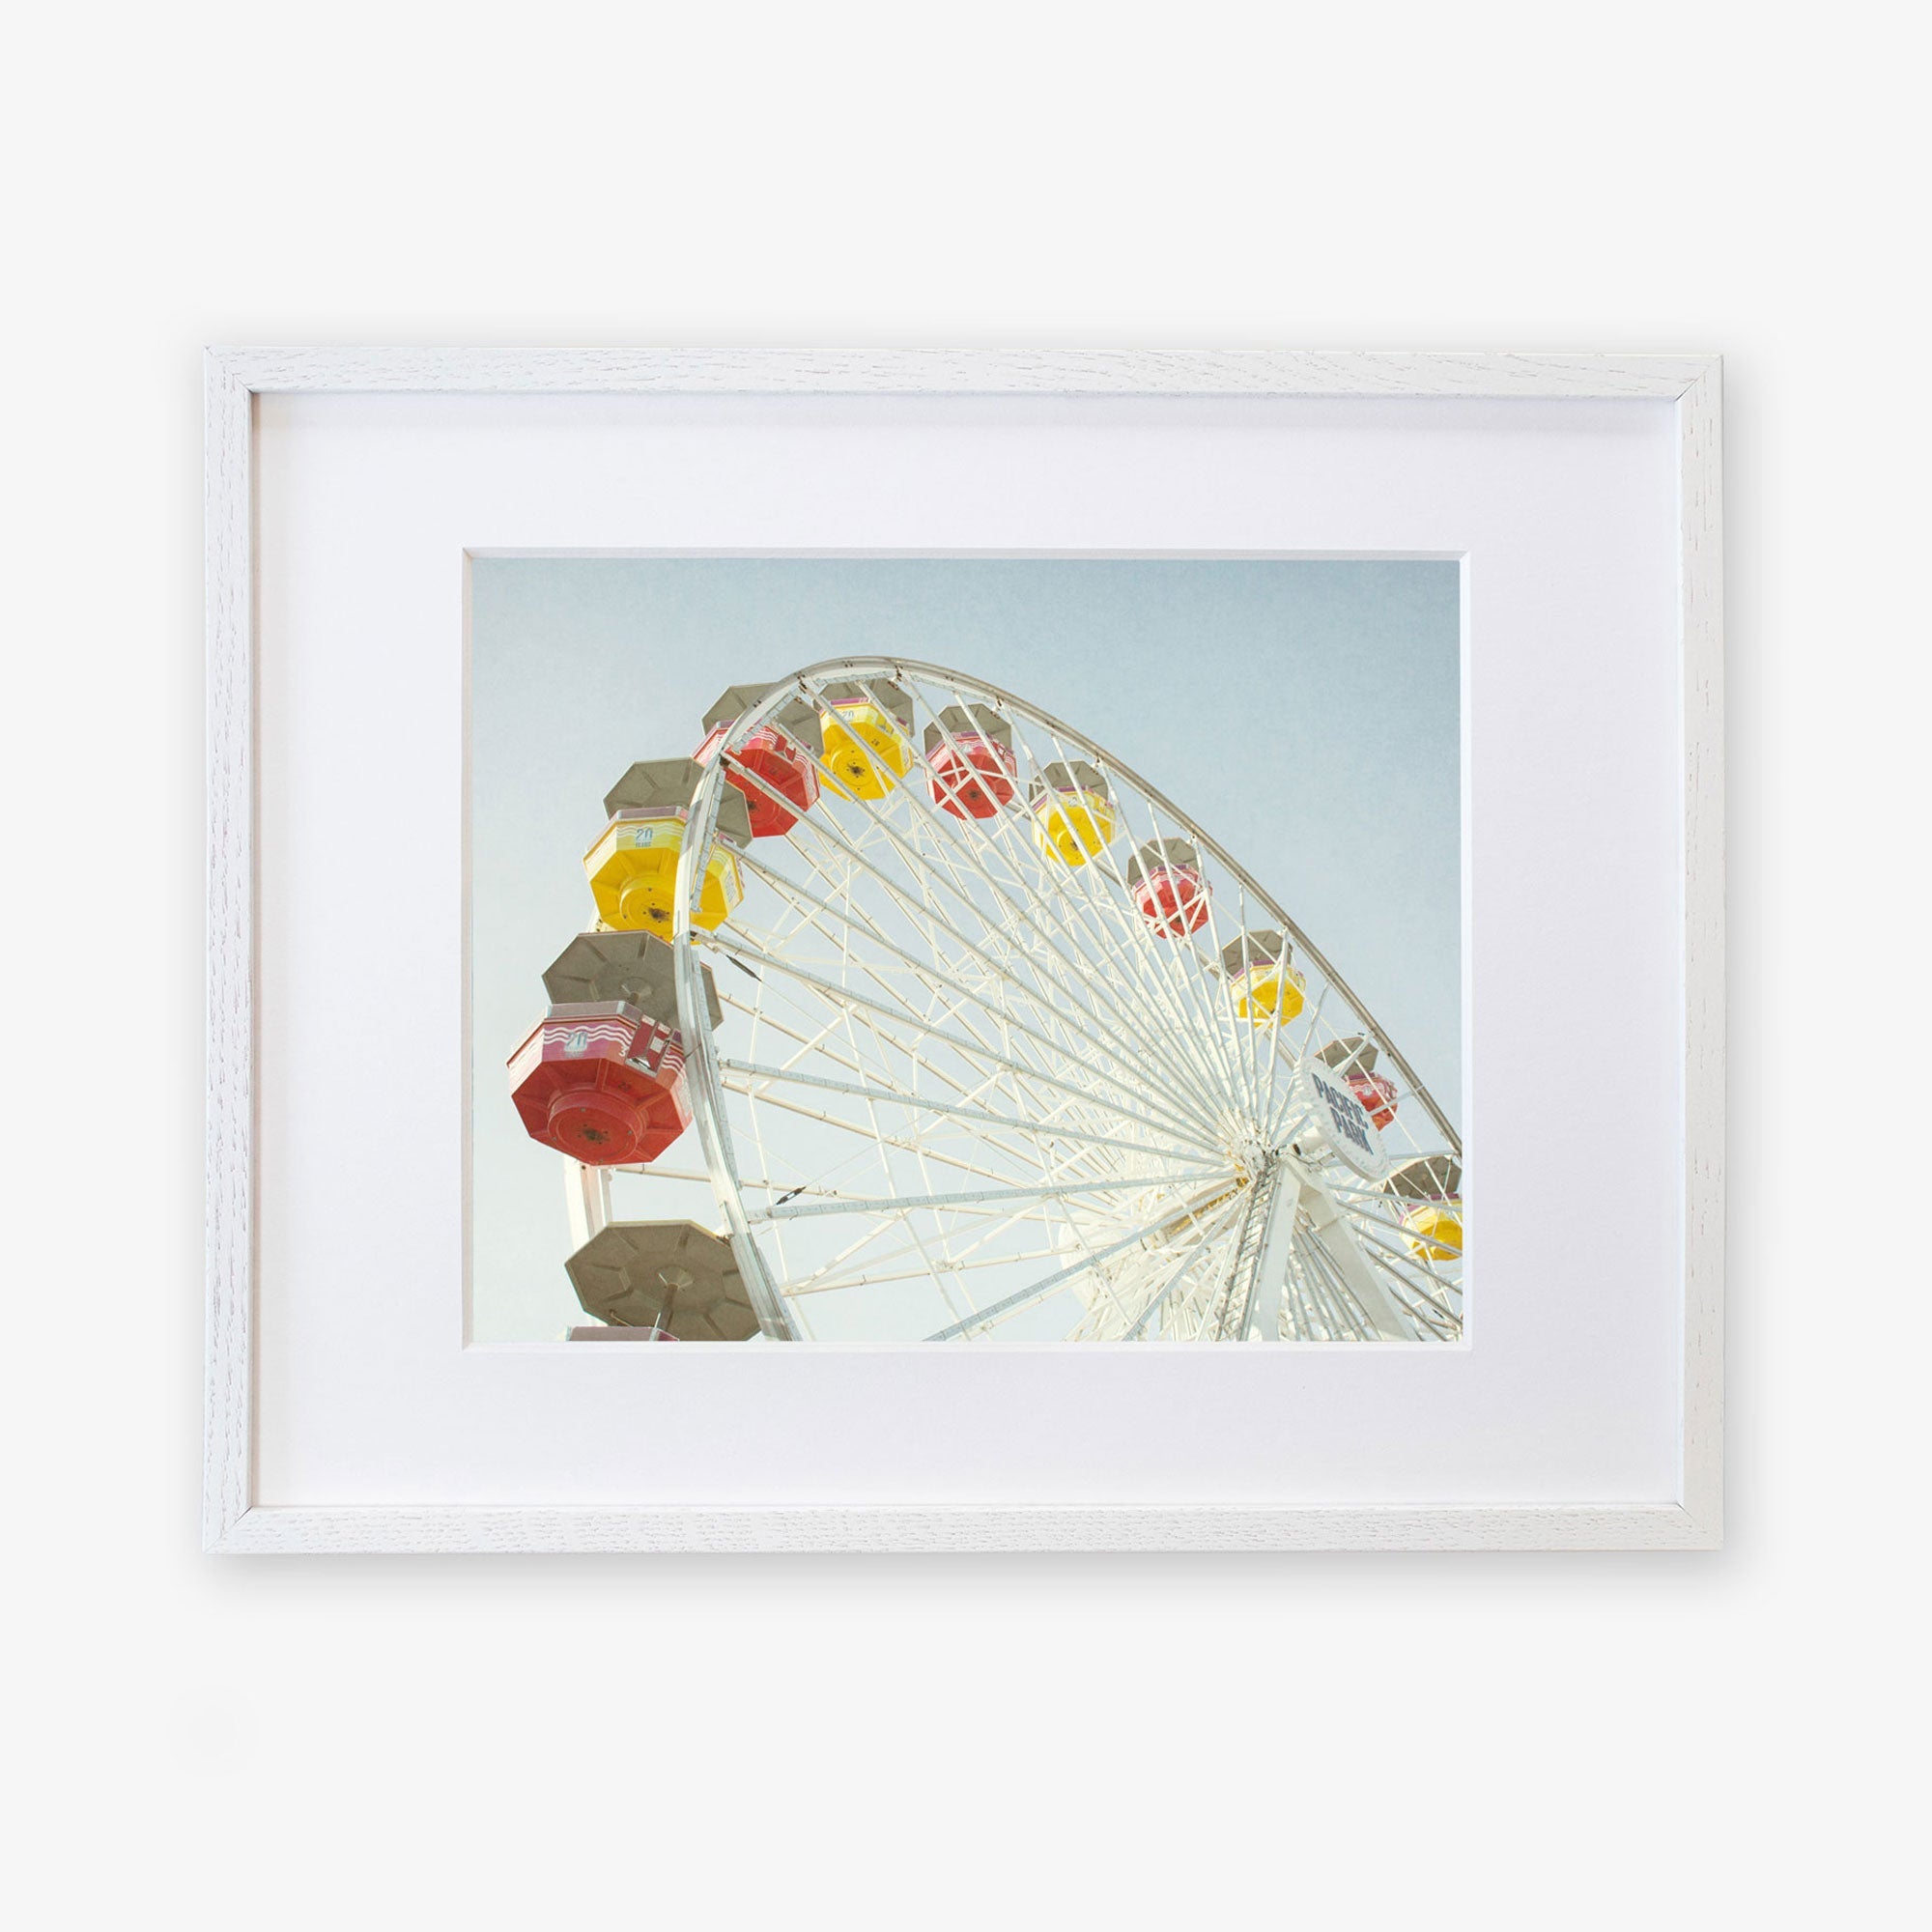 A framed photograph of a colorful Santa Monica Ferris Wheel Print, 'Ferris Above' at Santa Monica Pier against a clear sky, displayed within a simple white frame on a white background by Offley Green.